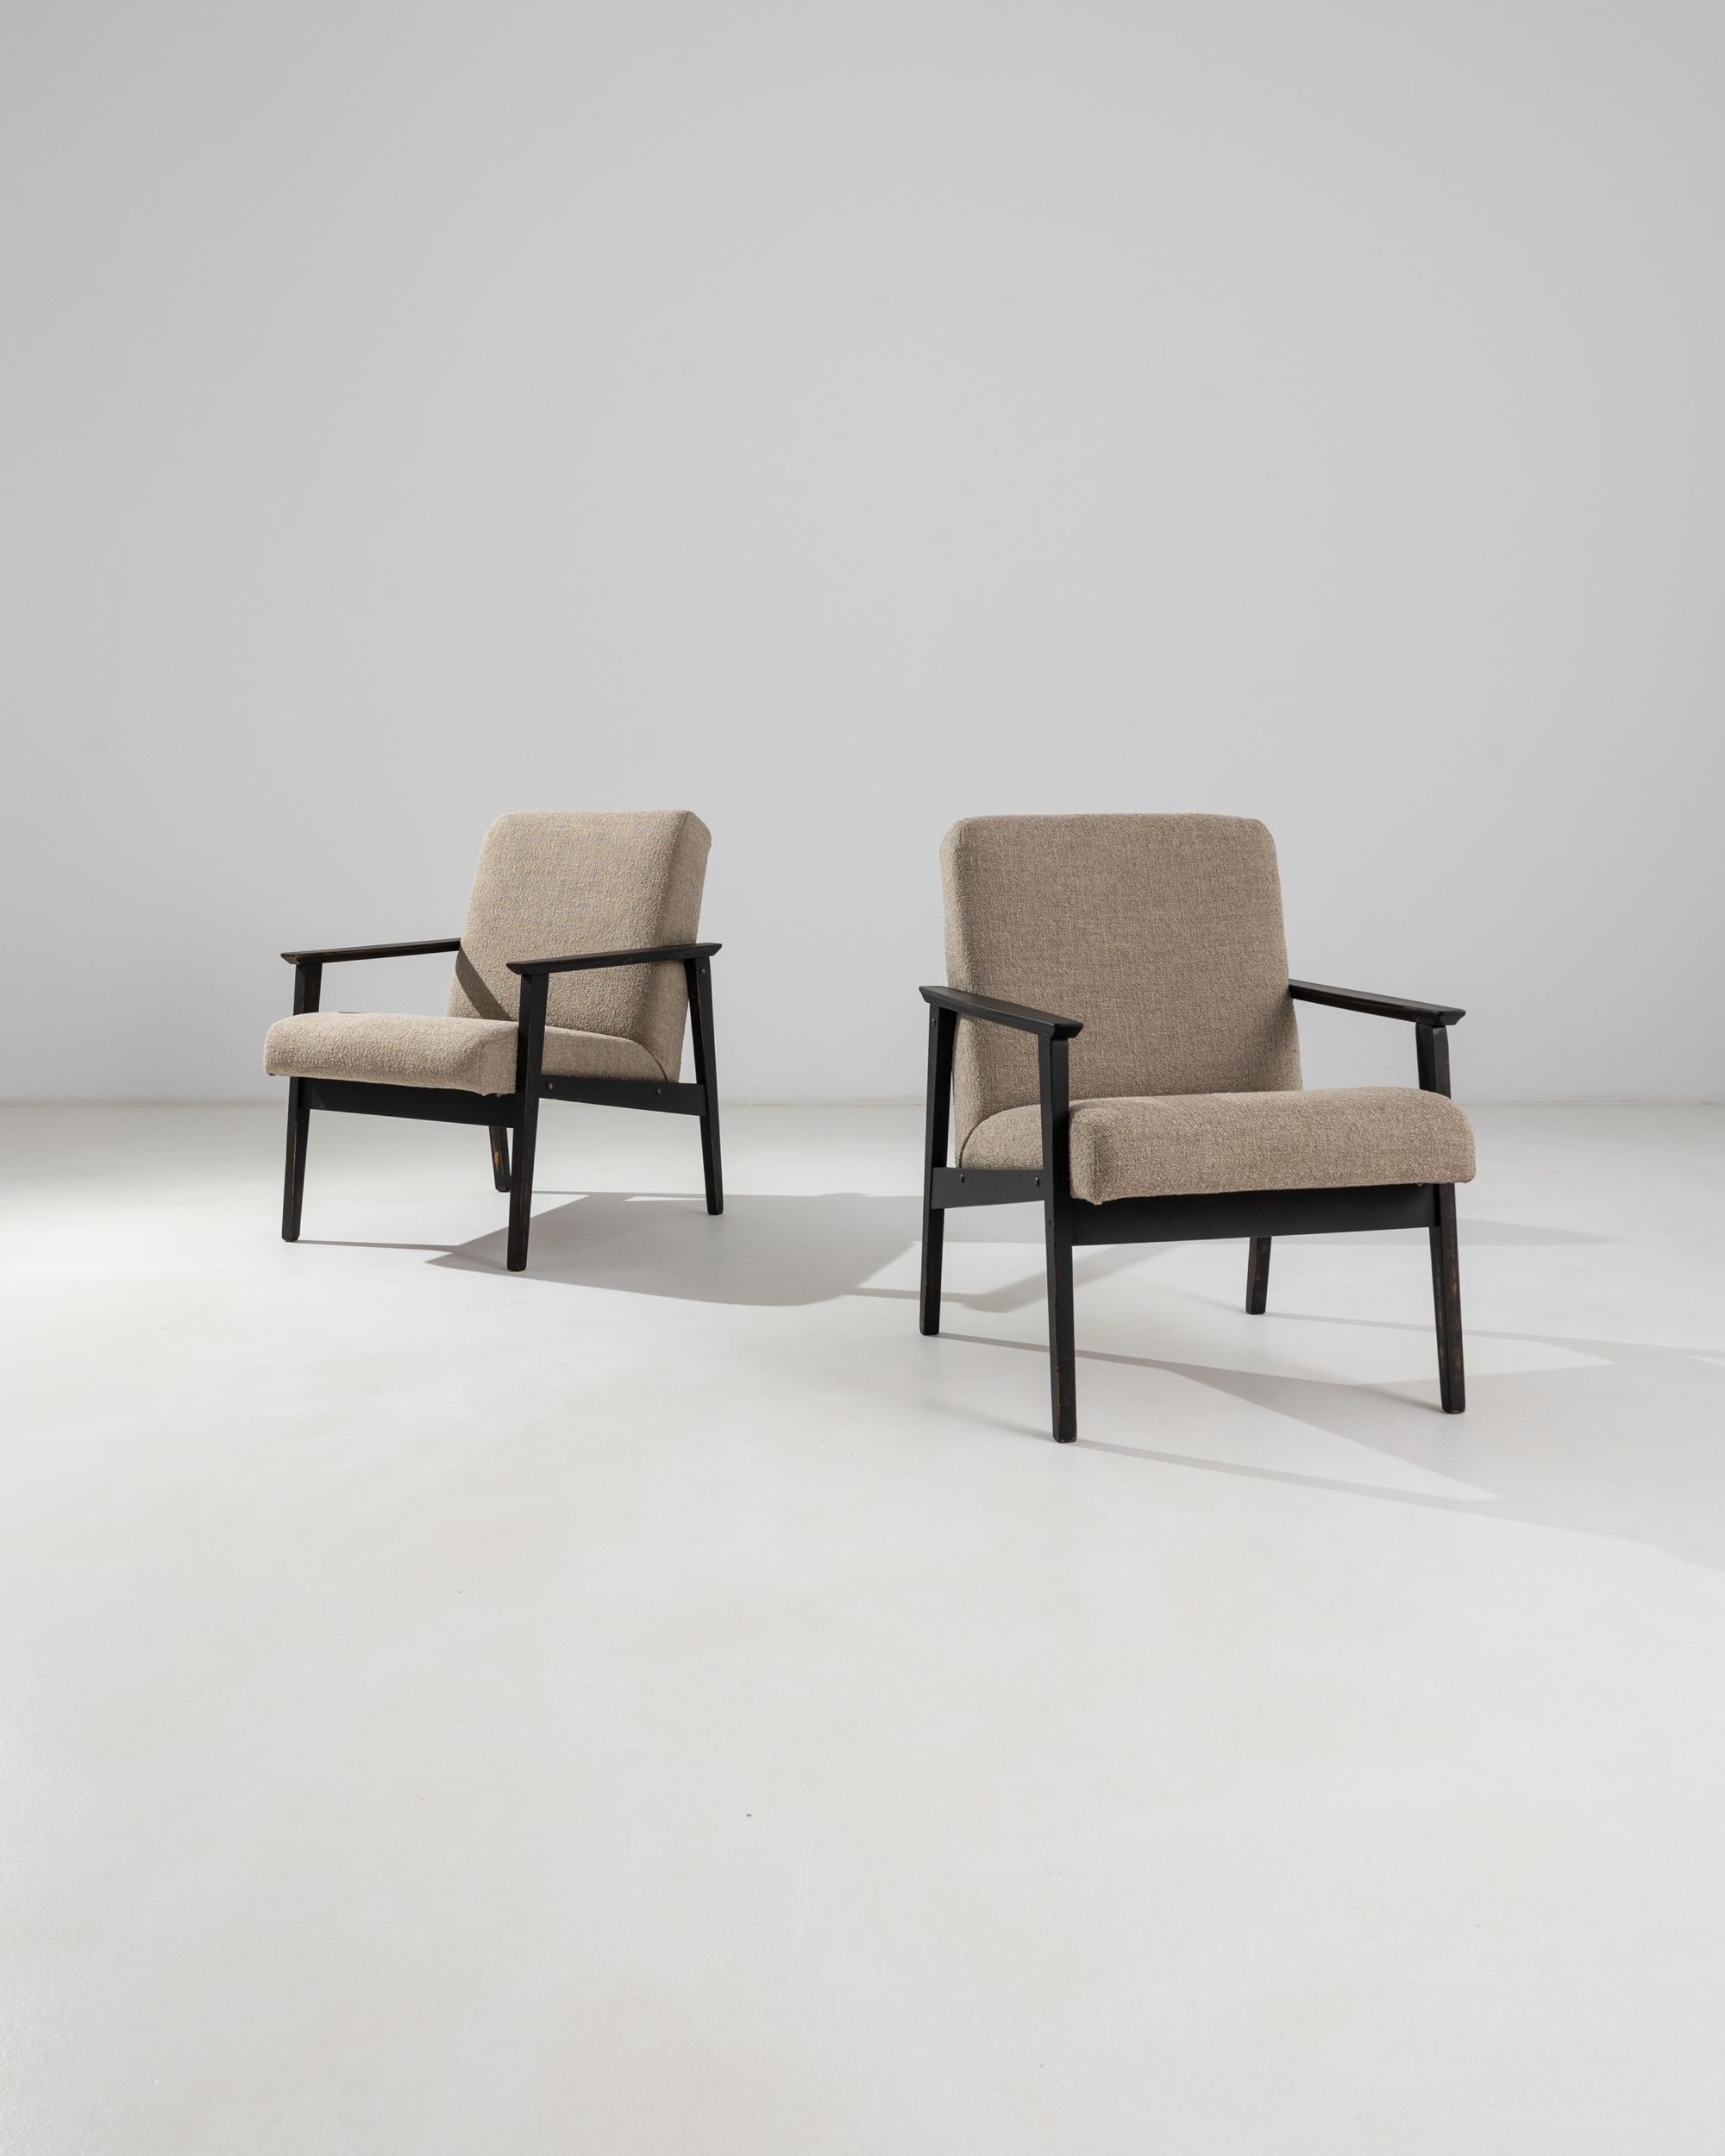 This pair of upholstered armchairs was produced in Czechia, circa 1960. A pair of sedate armchairs upholstered with a soft sand boucle fabric, featuring a slightly reclined back and a large seat for a comfortable posture. Completed by a minimal